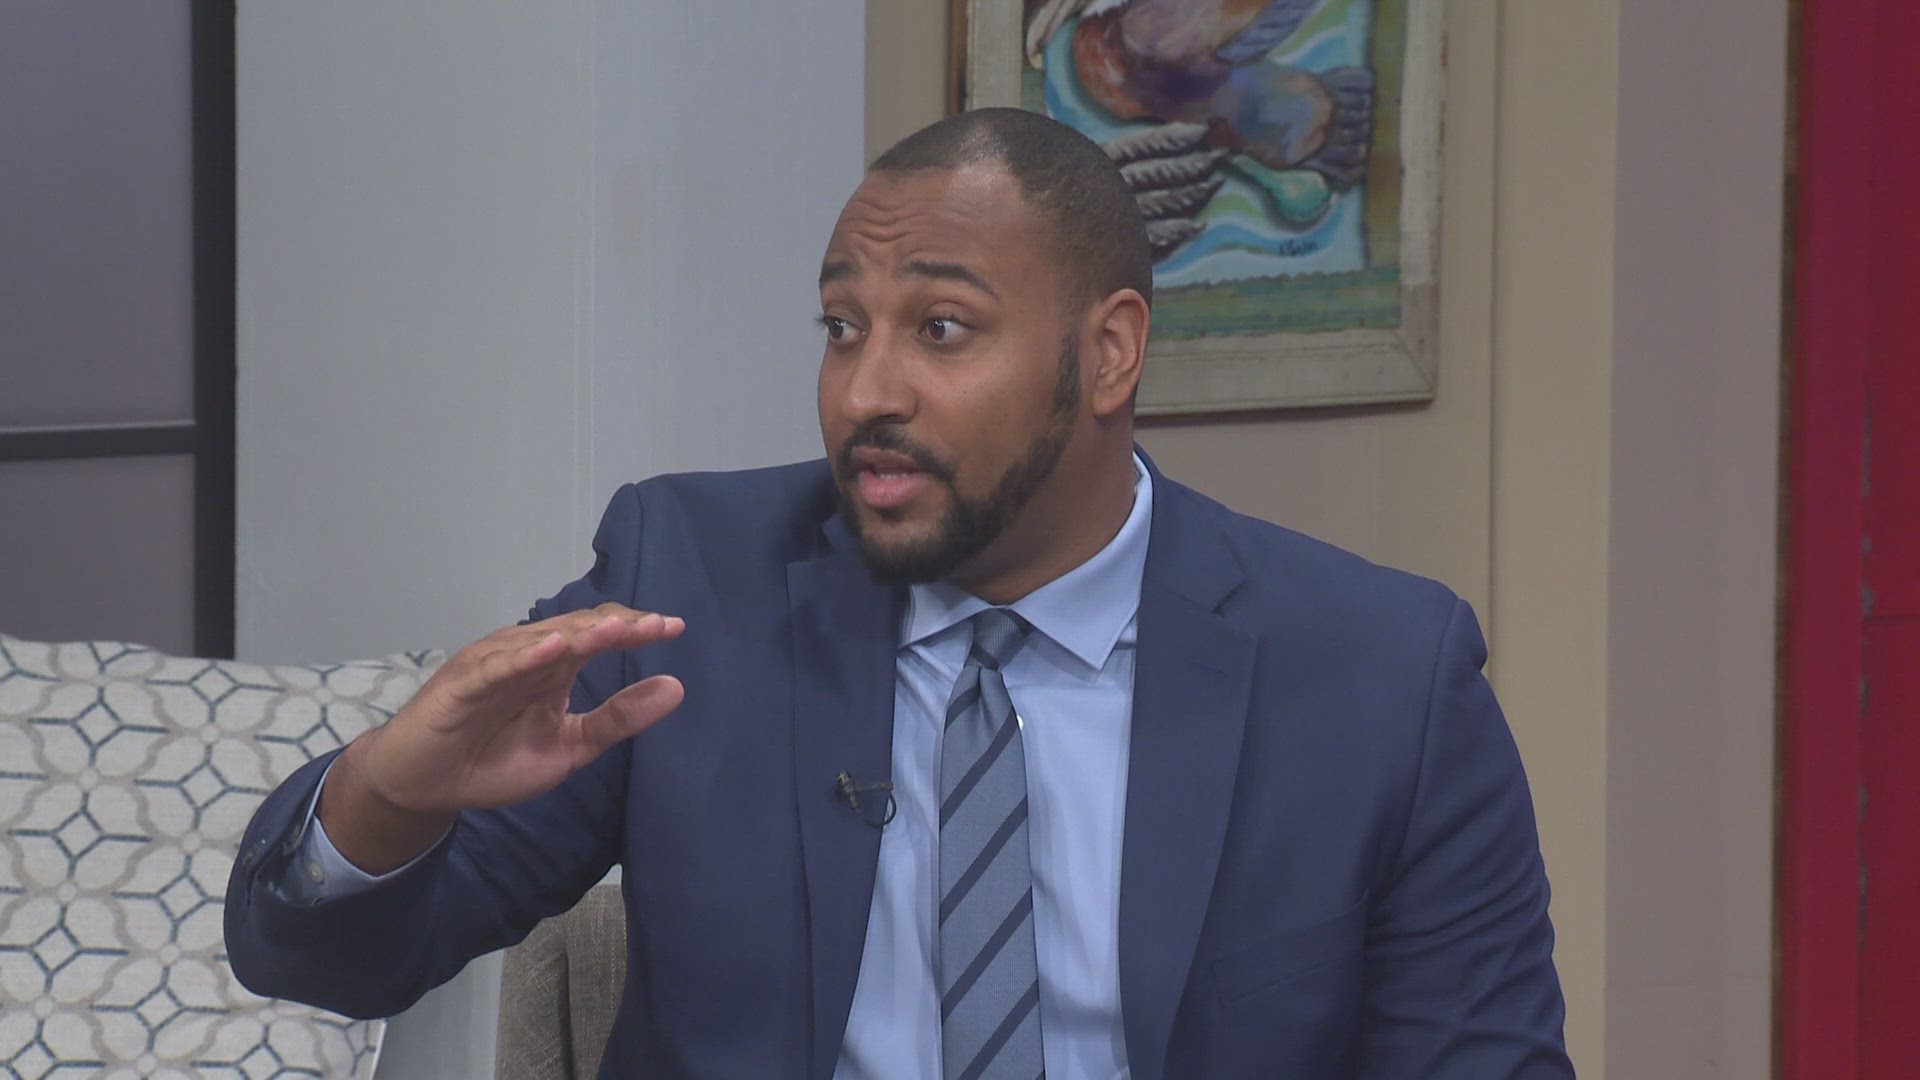 Financial Planner, Derrick Williams discusses President Biden's $10,000 tax credit proposal for homeowners.